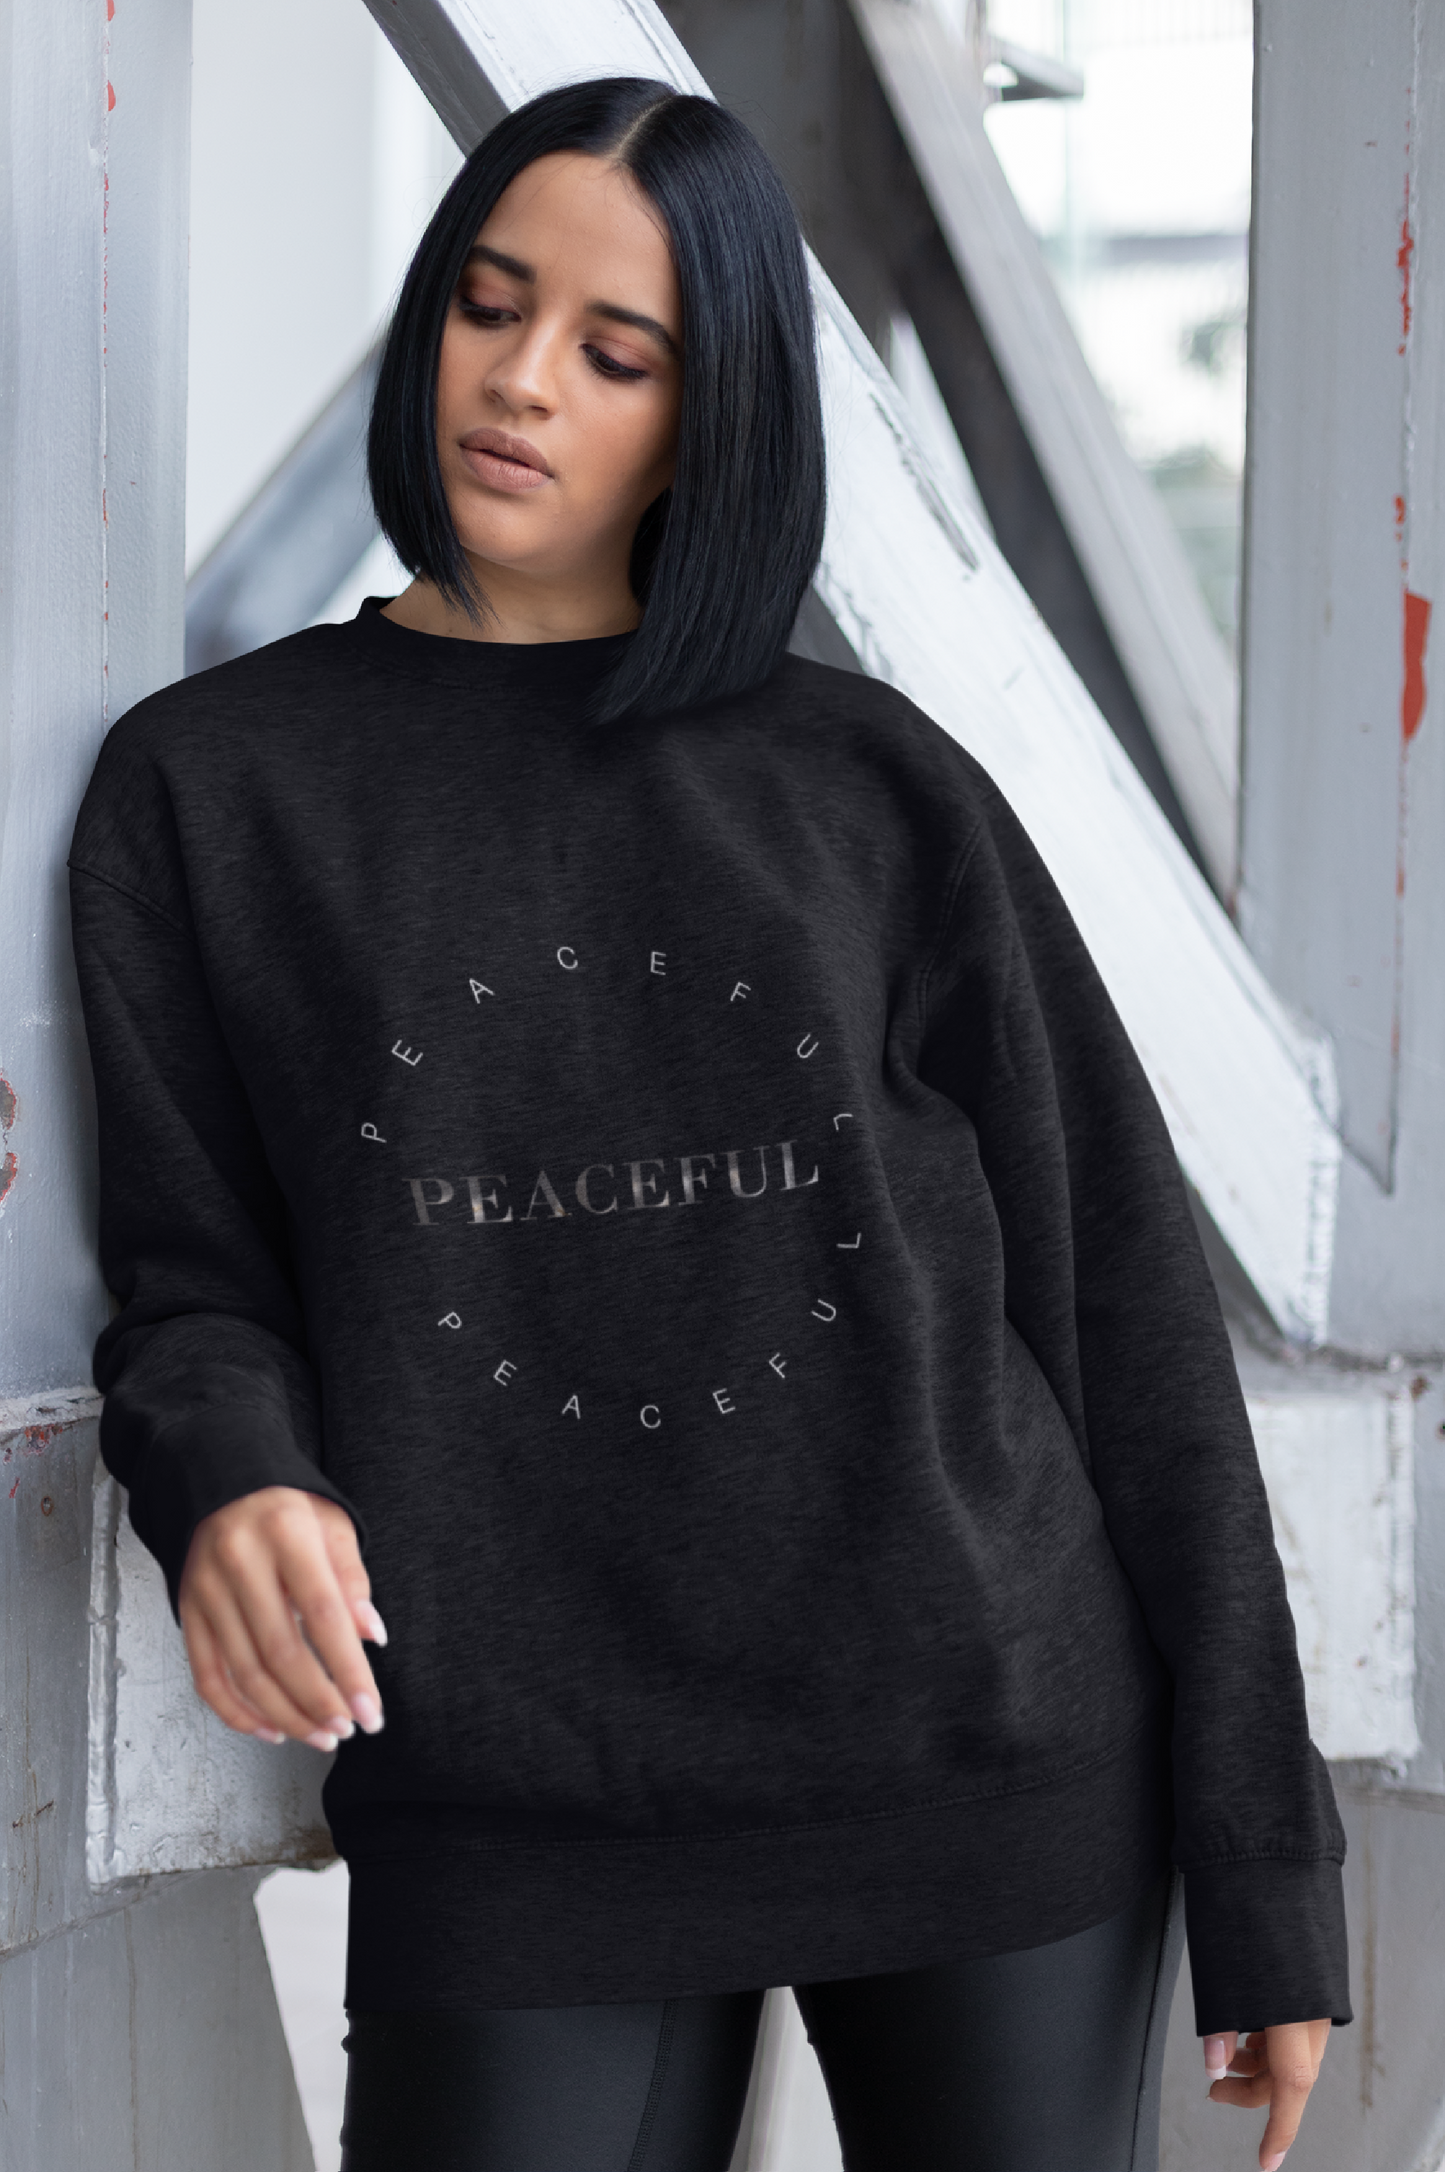 Peaceful Sweater, Inspirational Sweatshirt, Positive Quote Shirt For Women, Gift For Men Unisex Sweater